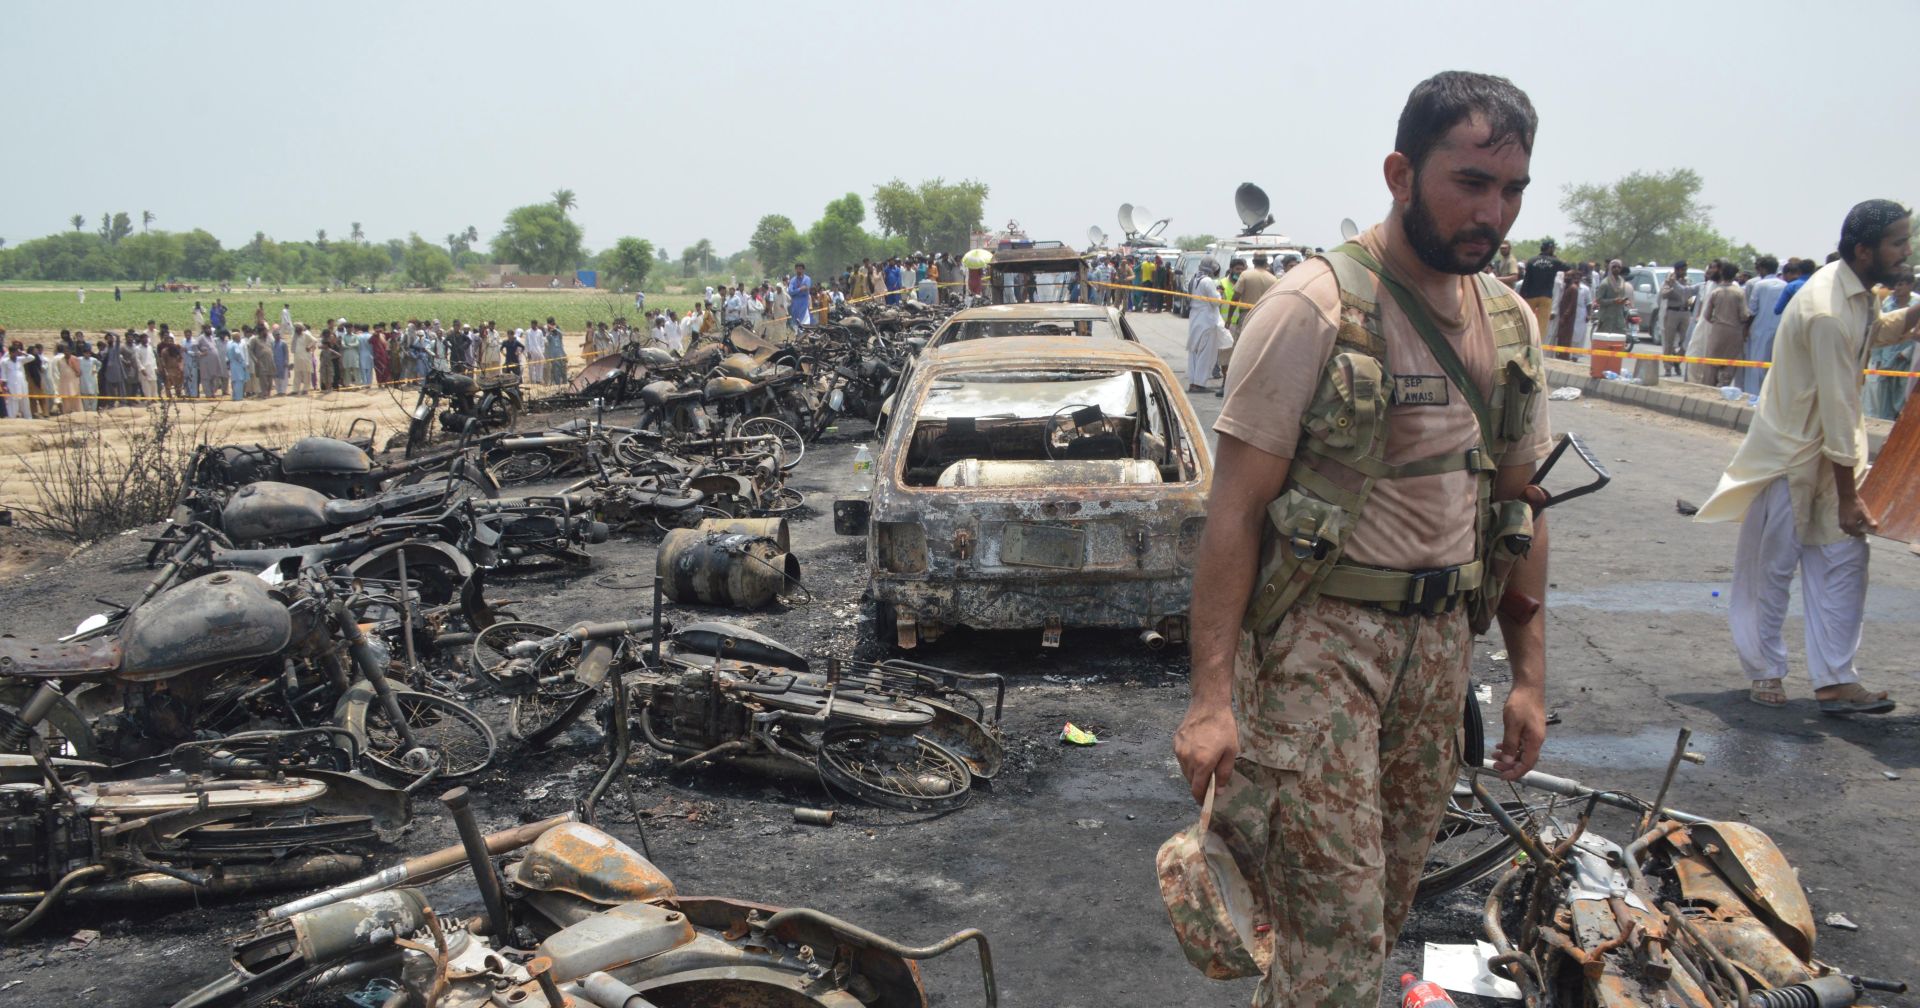 epa06049178 A Pakistani Army soldier stands guard amidst the burnt vehicles at the scene of an Oil tanker accident on the outskirts of Bahawalpur, Pakistan, 25 June 2017. At least 123 people were killed and 80 injured when an Oil tanker exploded as people gathered to collect oil from the tanker that overturned on a highway near Bahawalpur.  EPA/FAISAL KAREEM